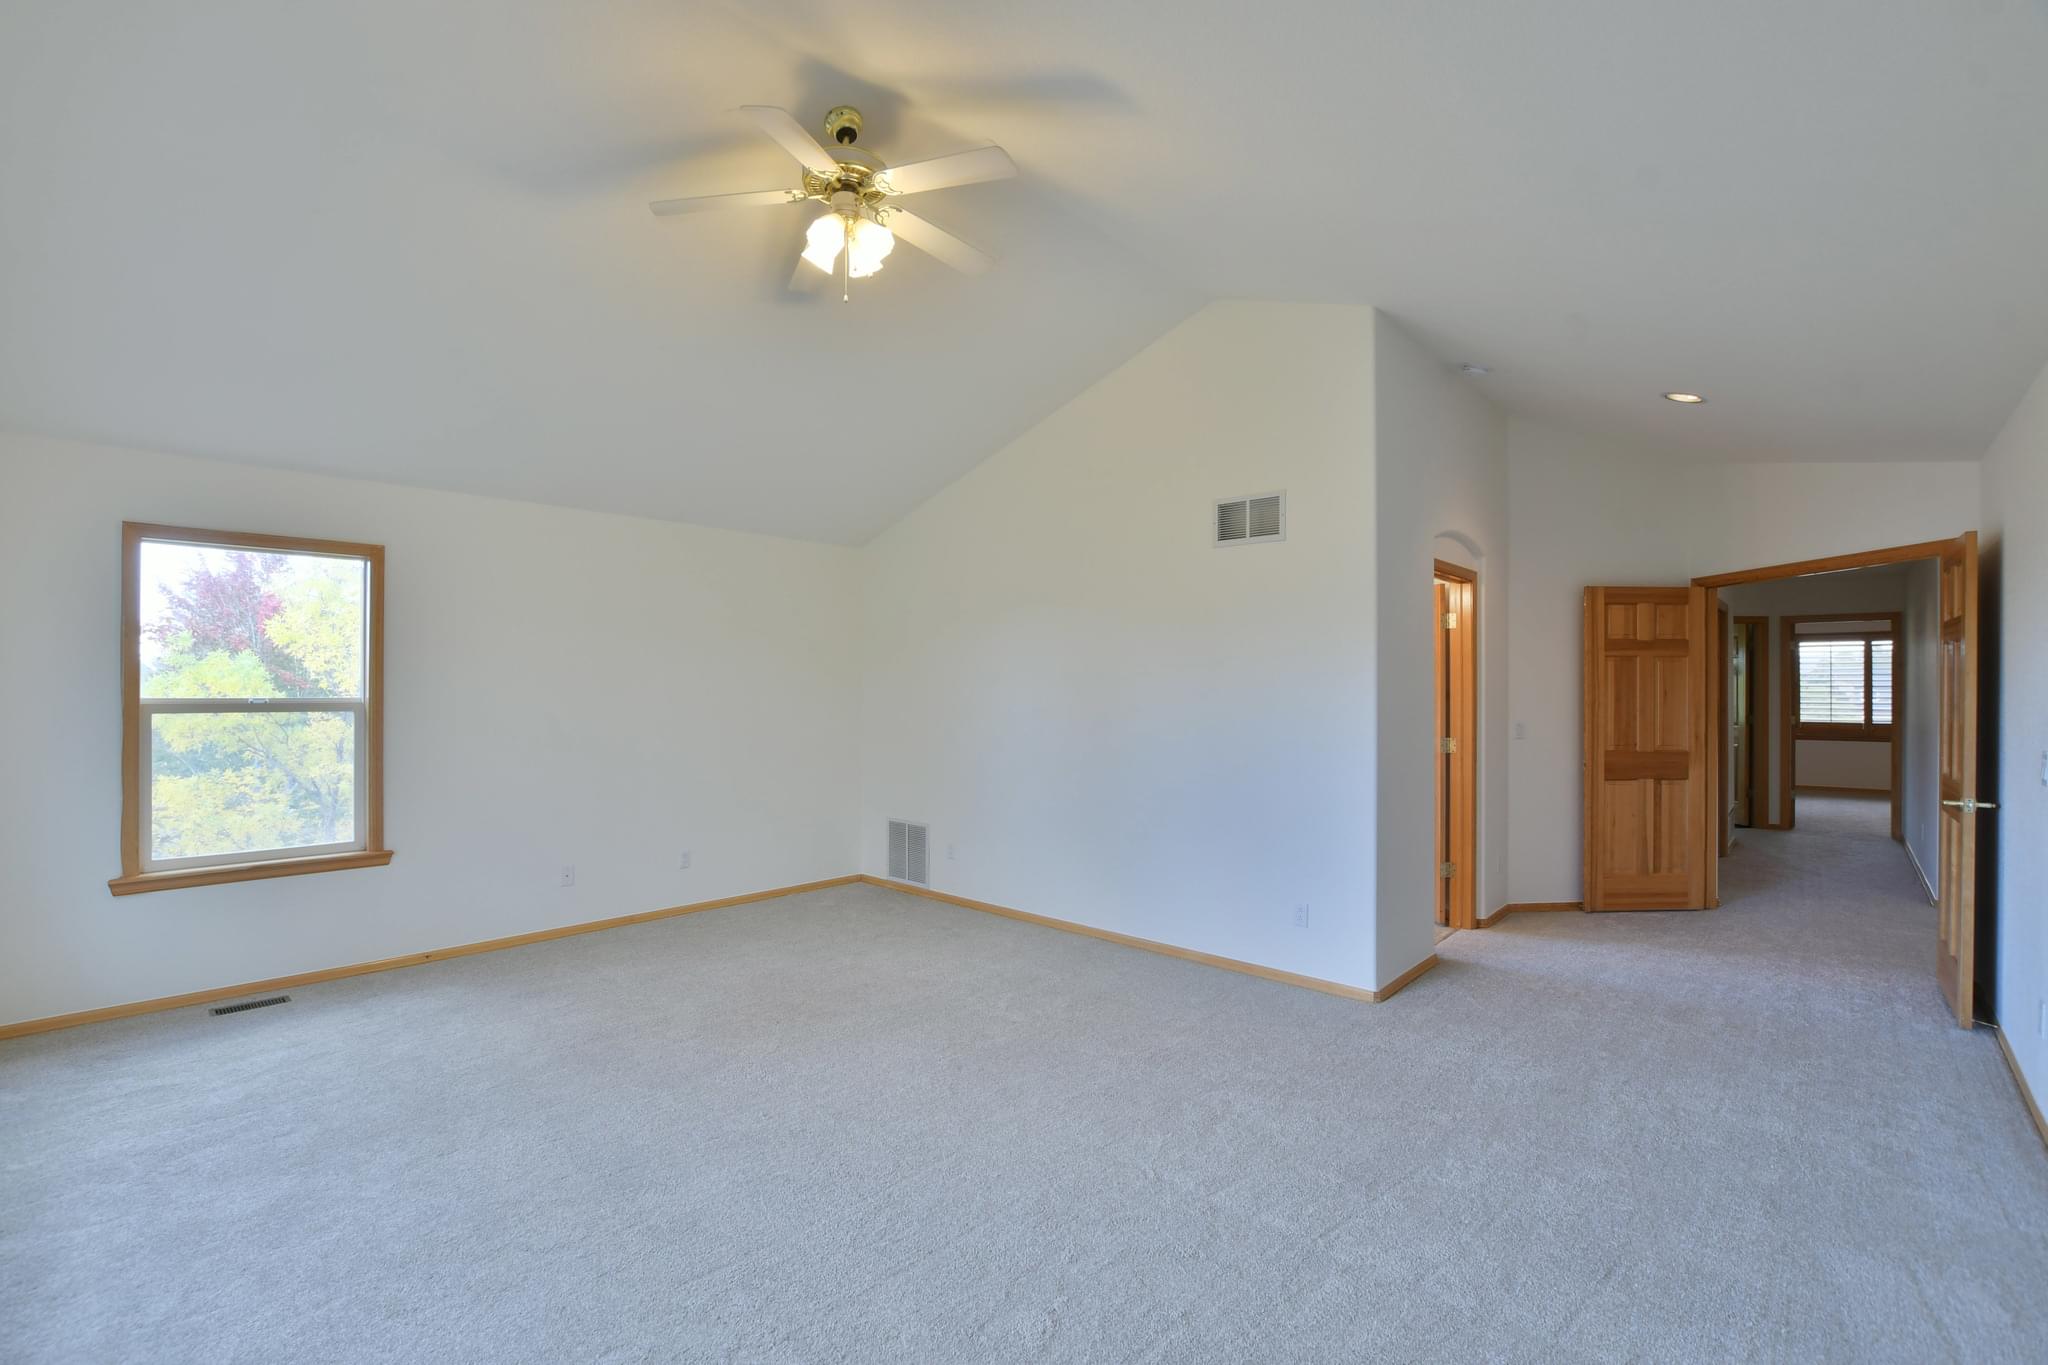  6157 Russell Ct, Golden, CO 80403, US Photo 23